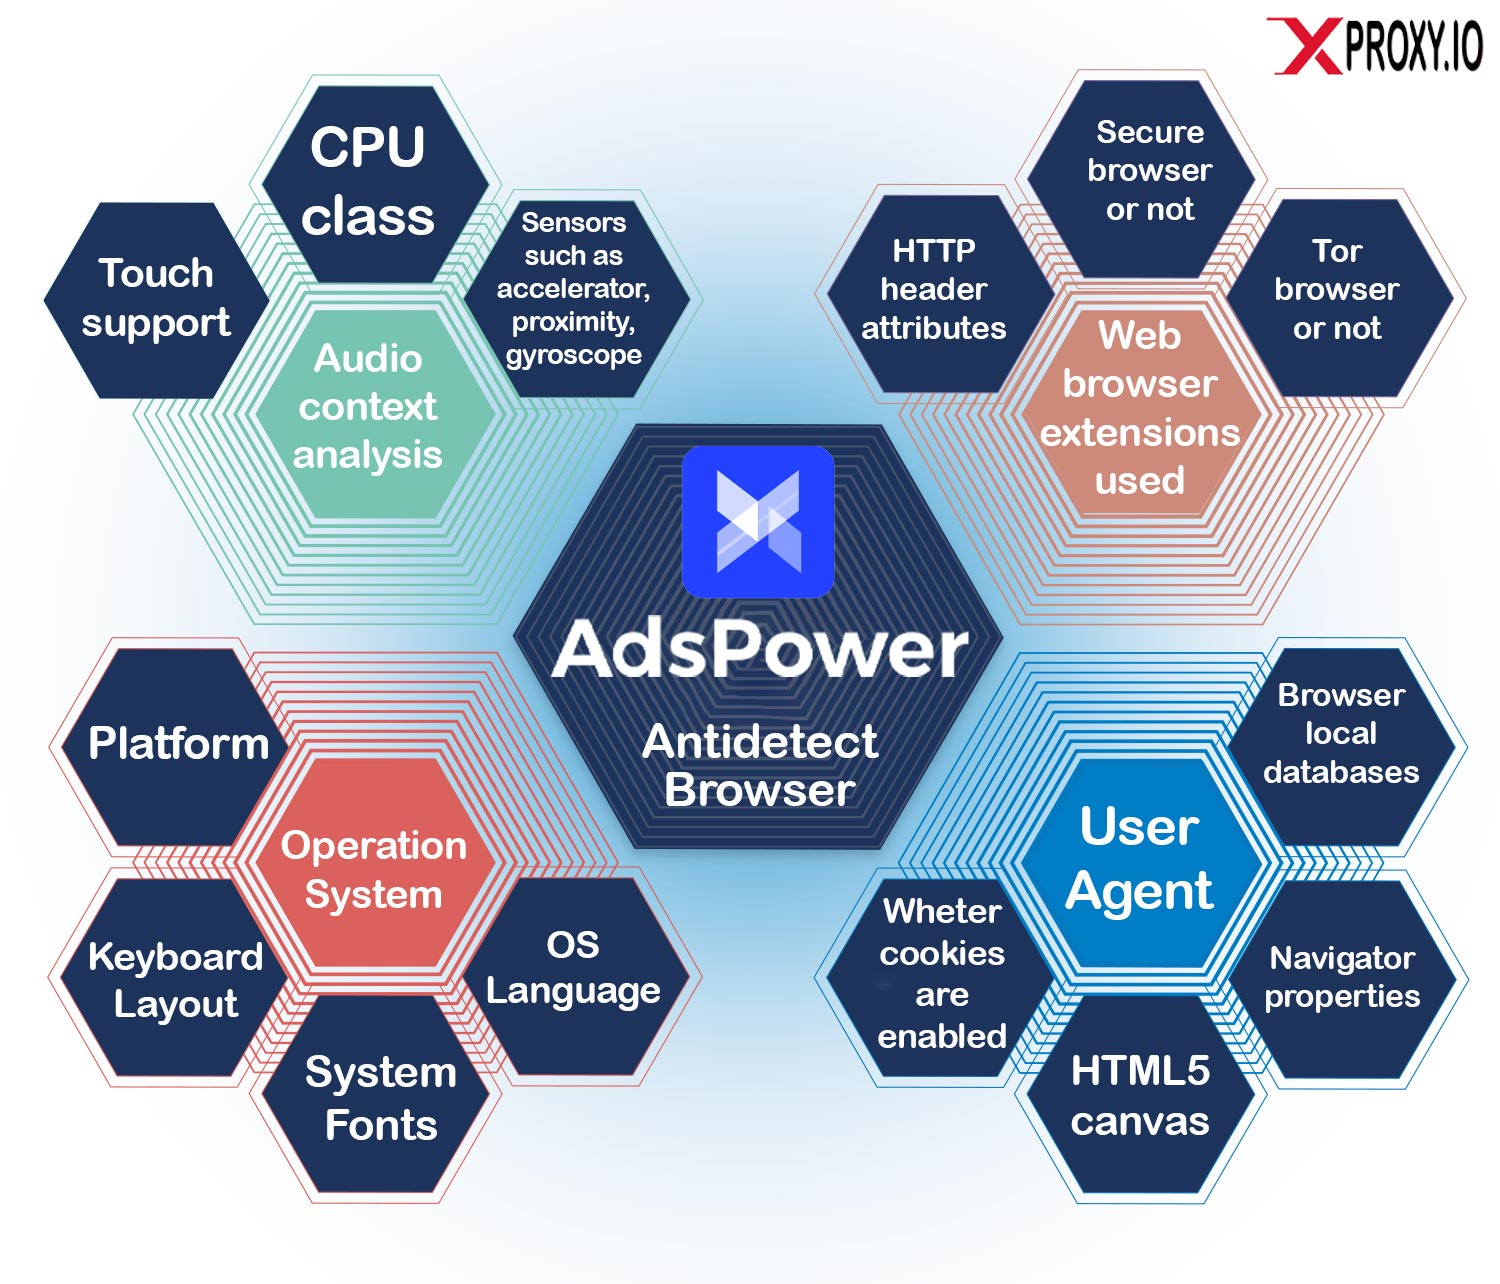 Enhancing Online Presence with XProxy and AdsPower Antidetect Browser